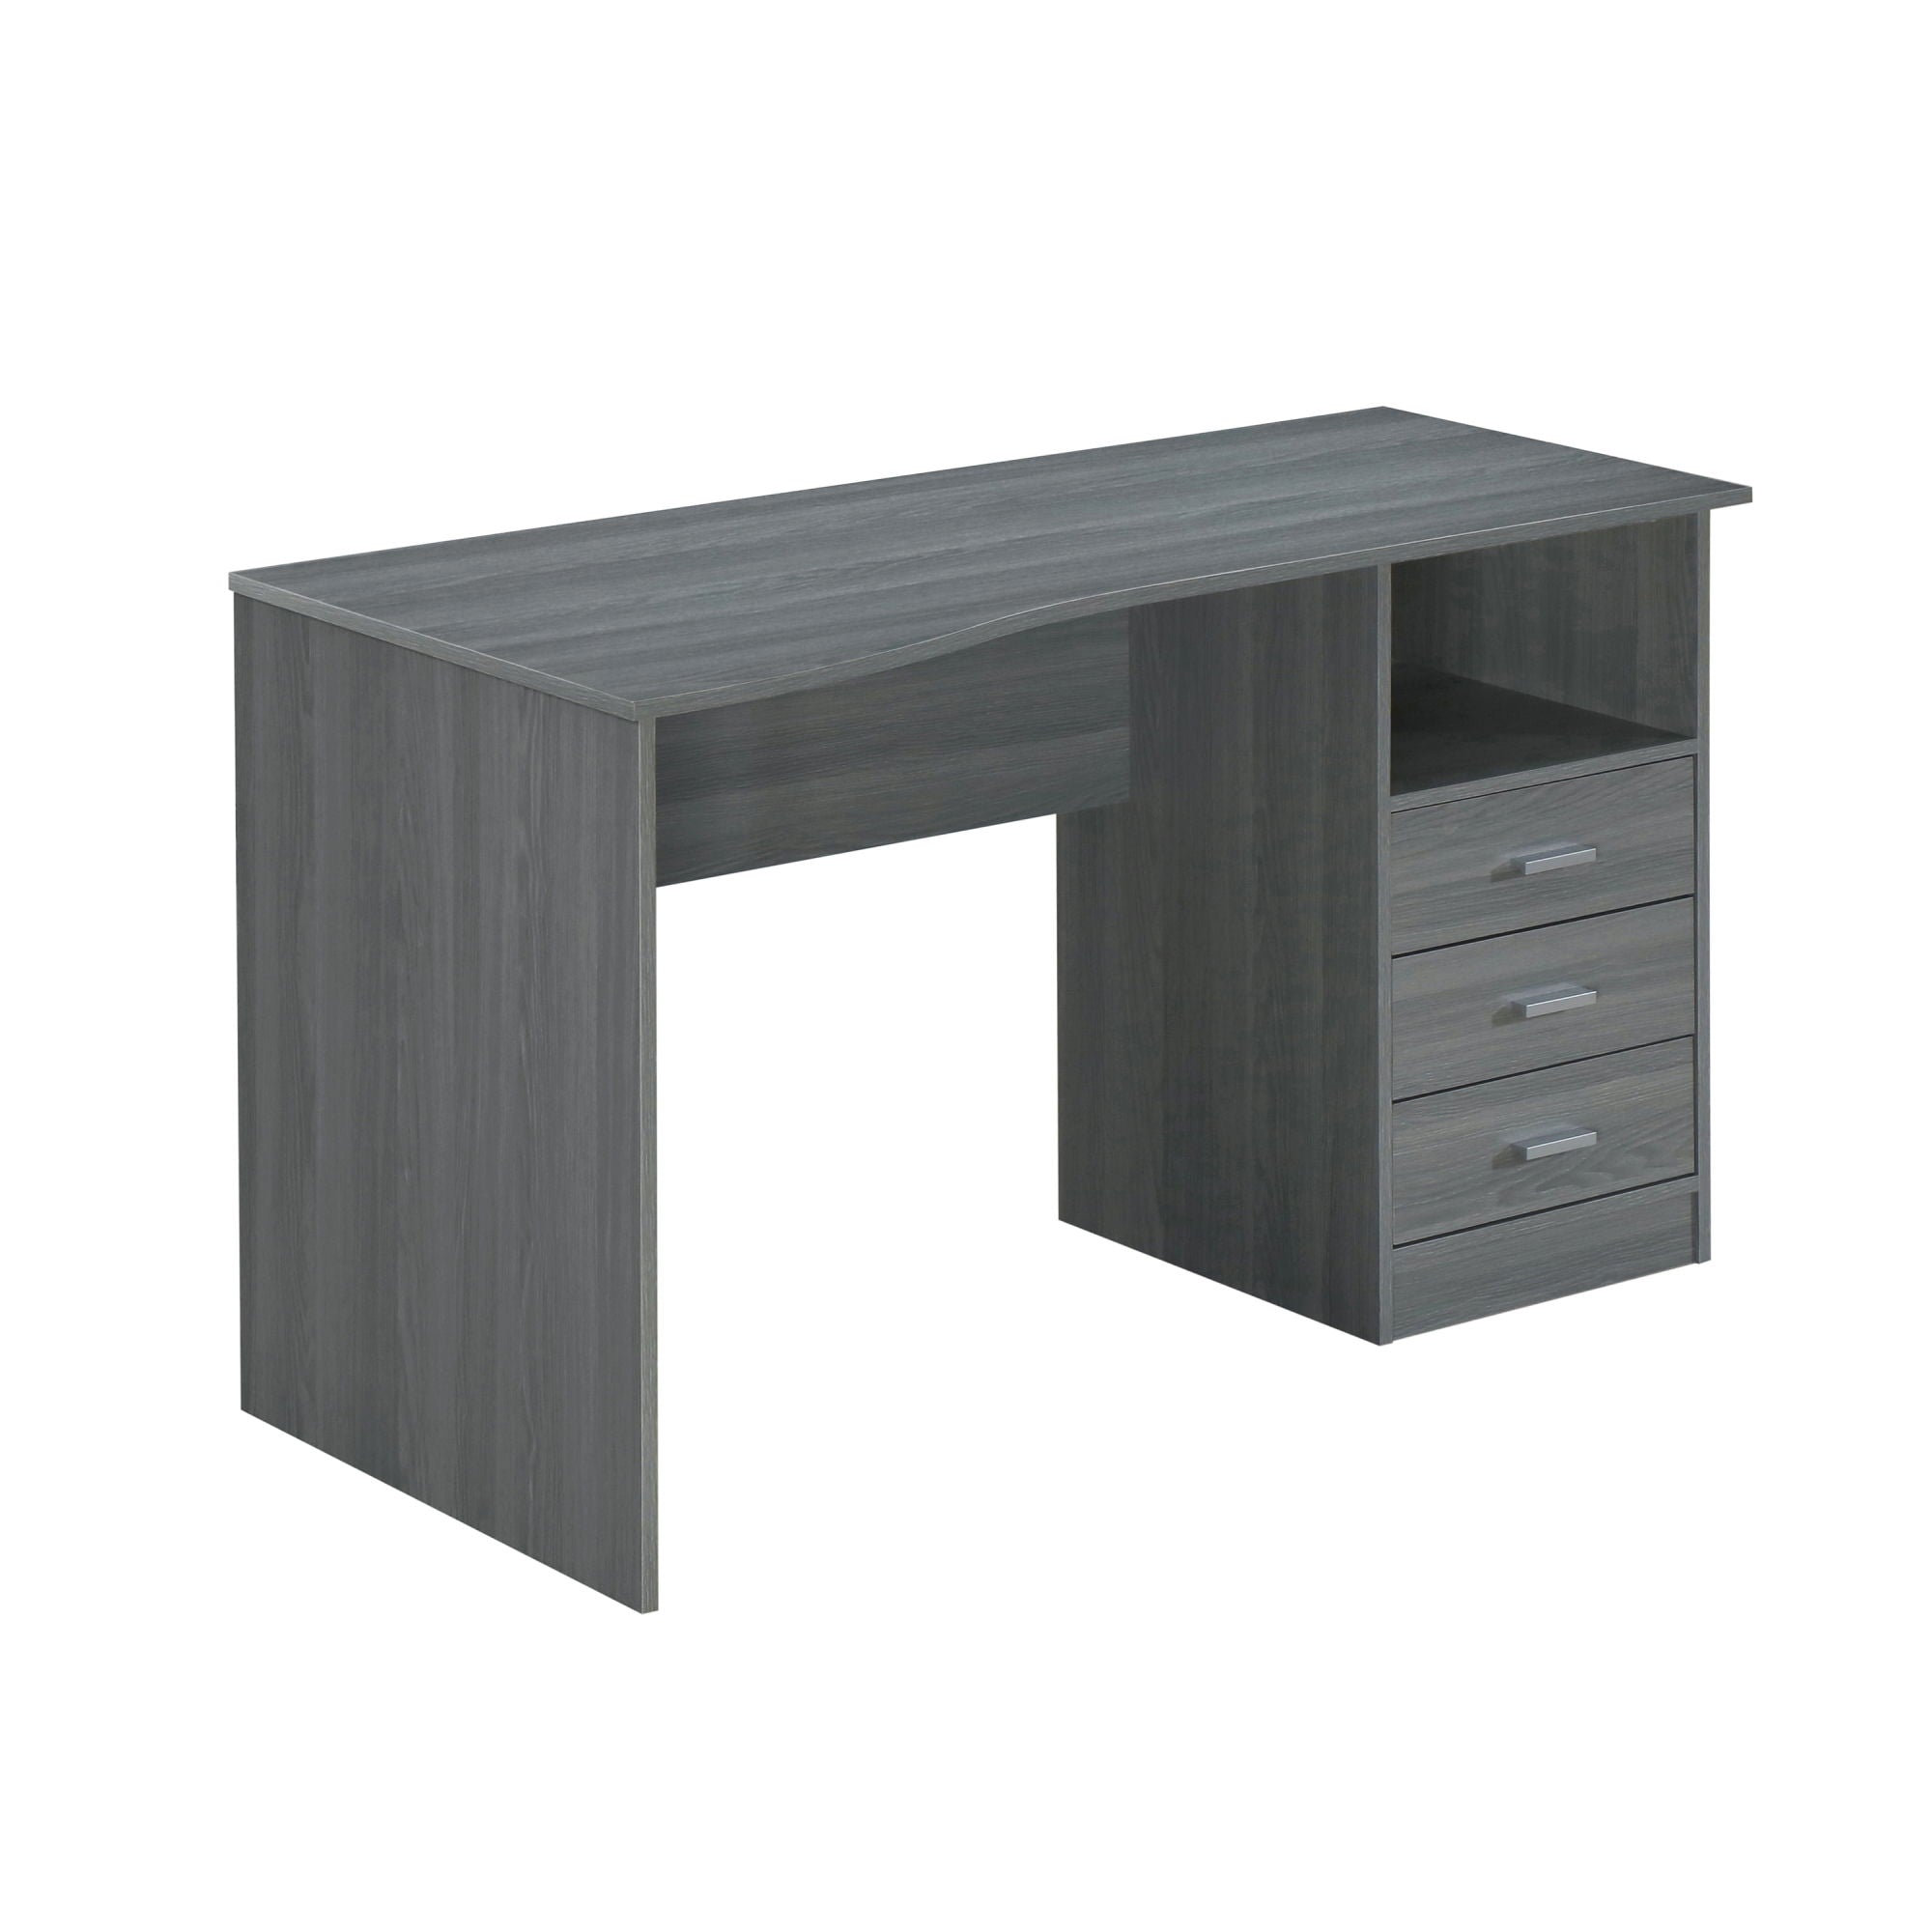 Techni Mobili Classic Computer Desk: Grey with Multiple Drawers